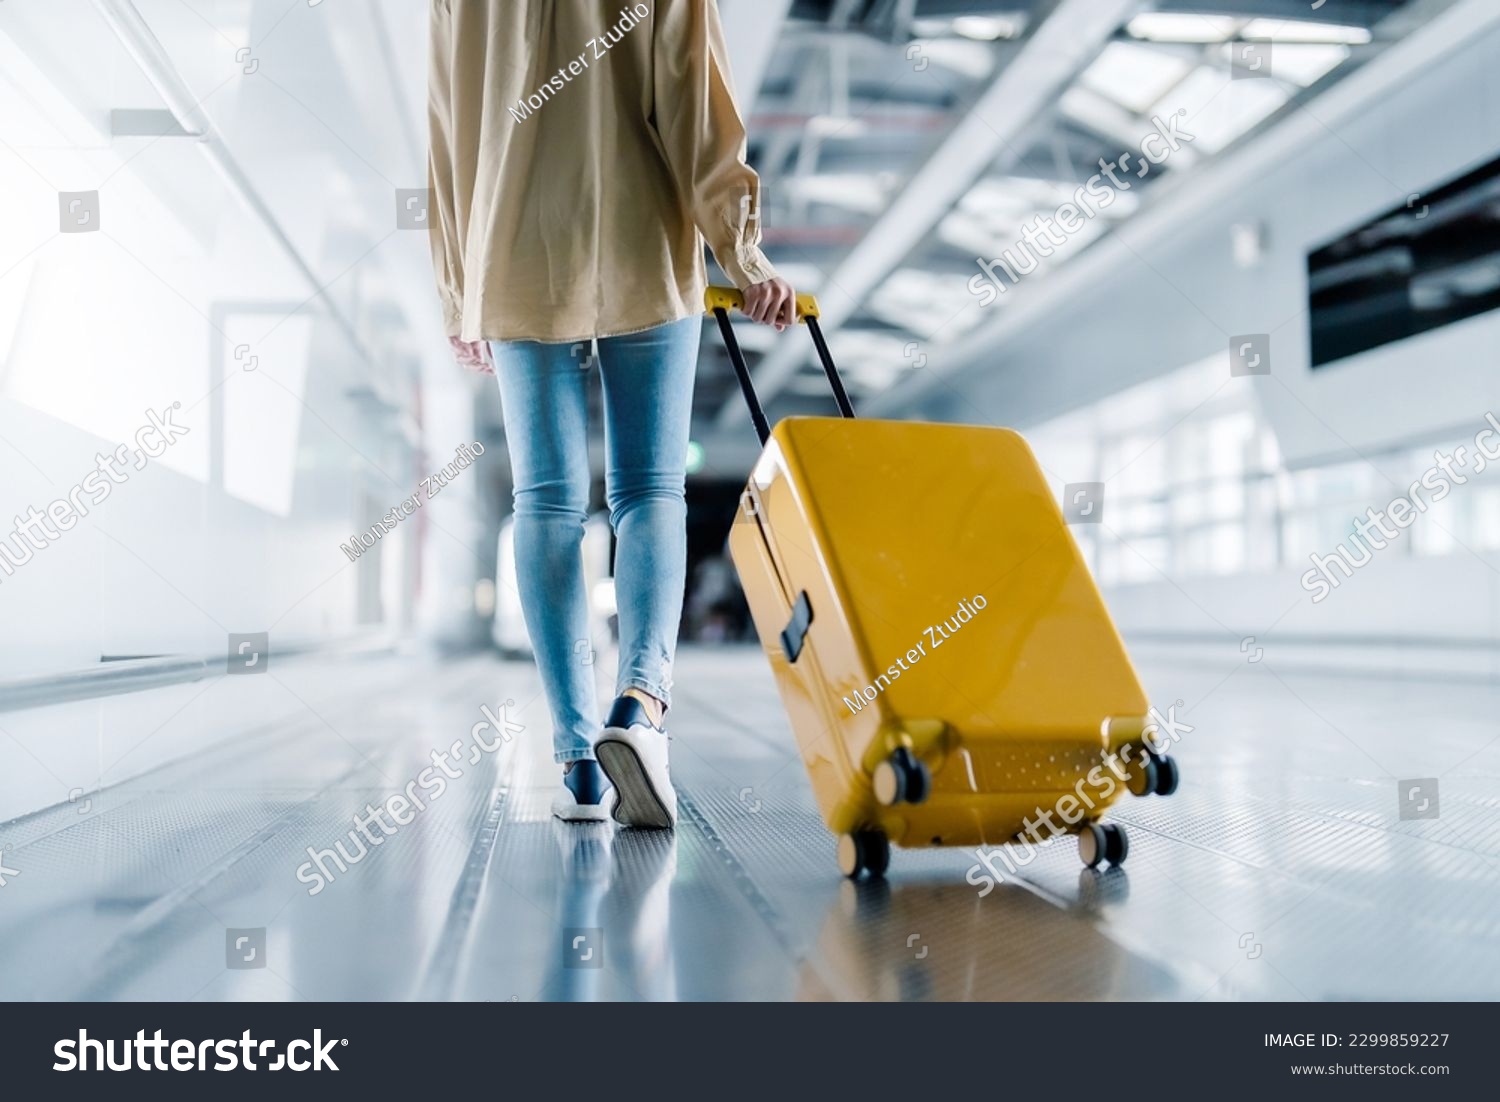 International airport terminal. Asian beautiful woman with luggage and walking in airport #2299859227